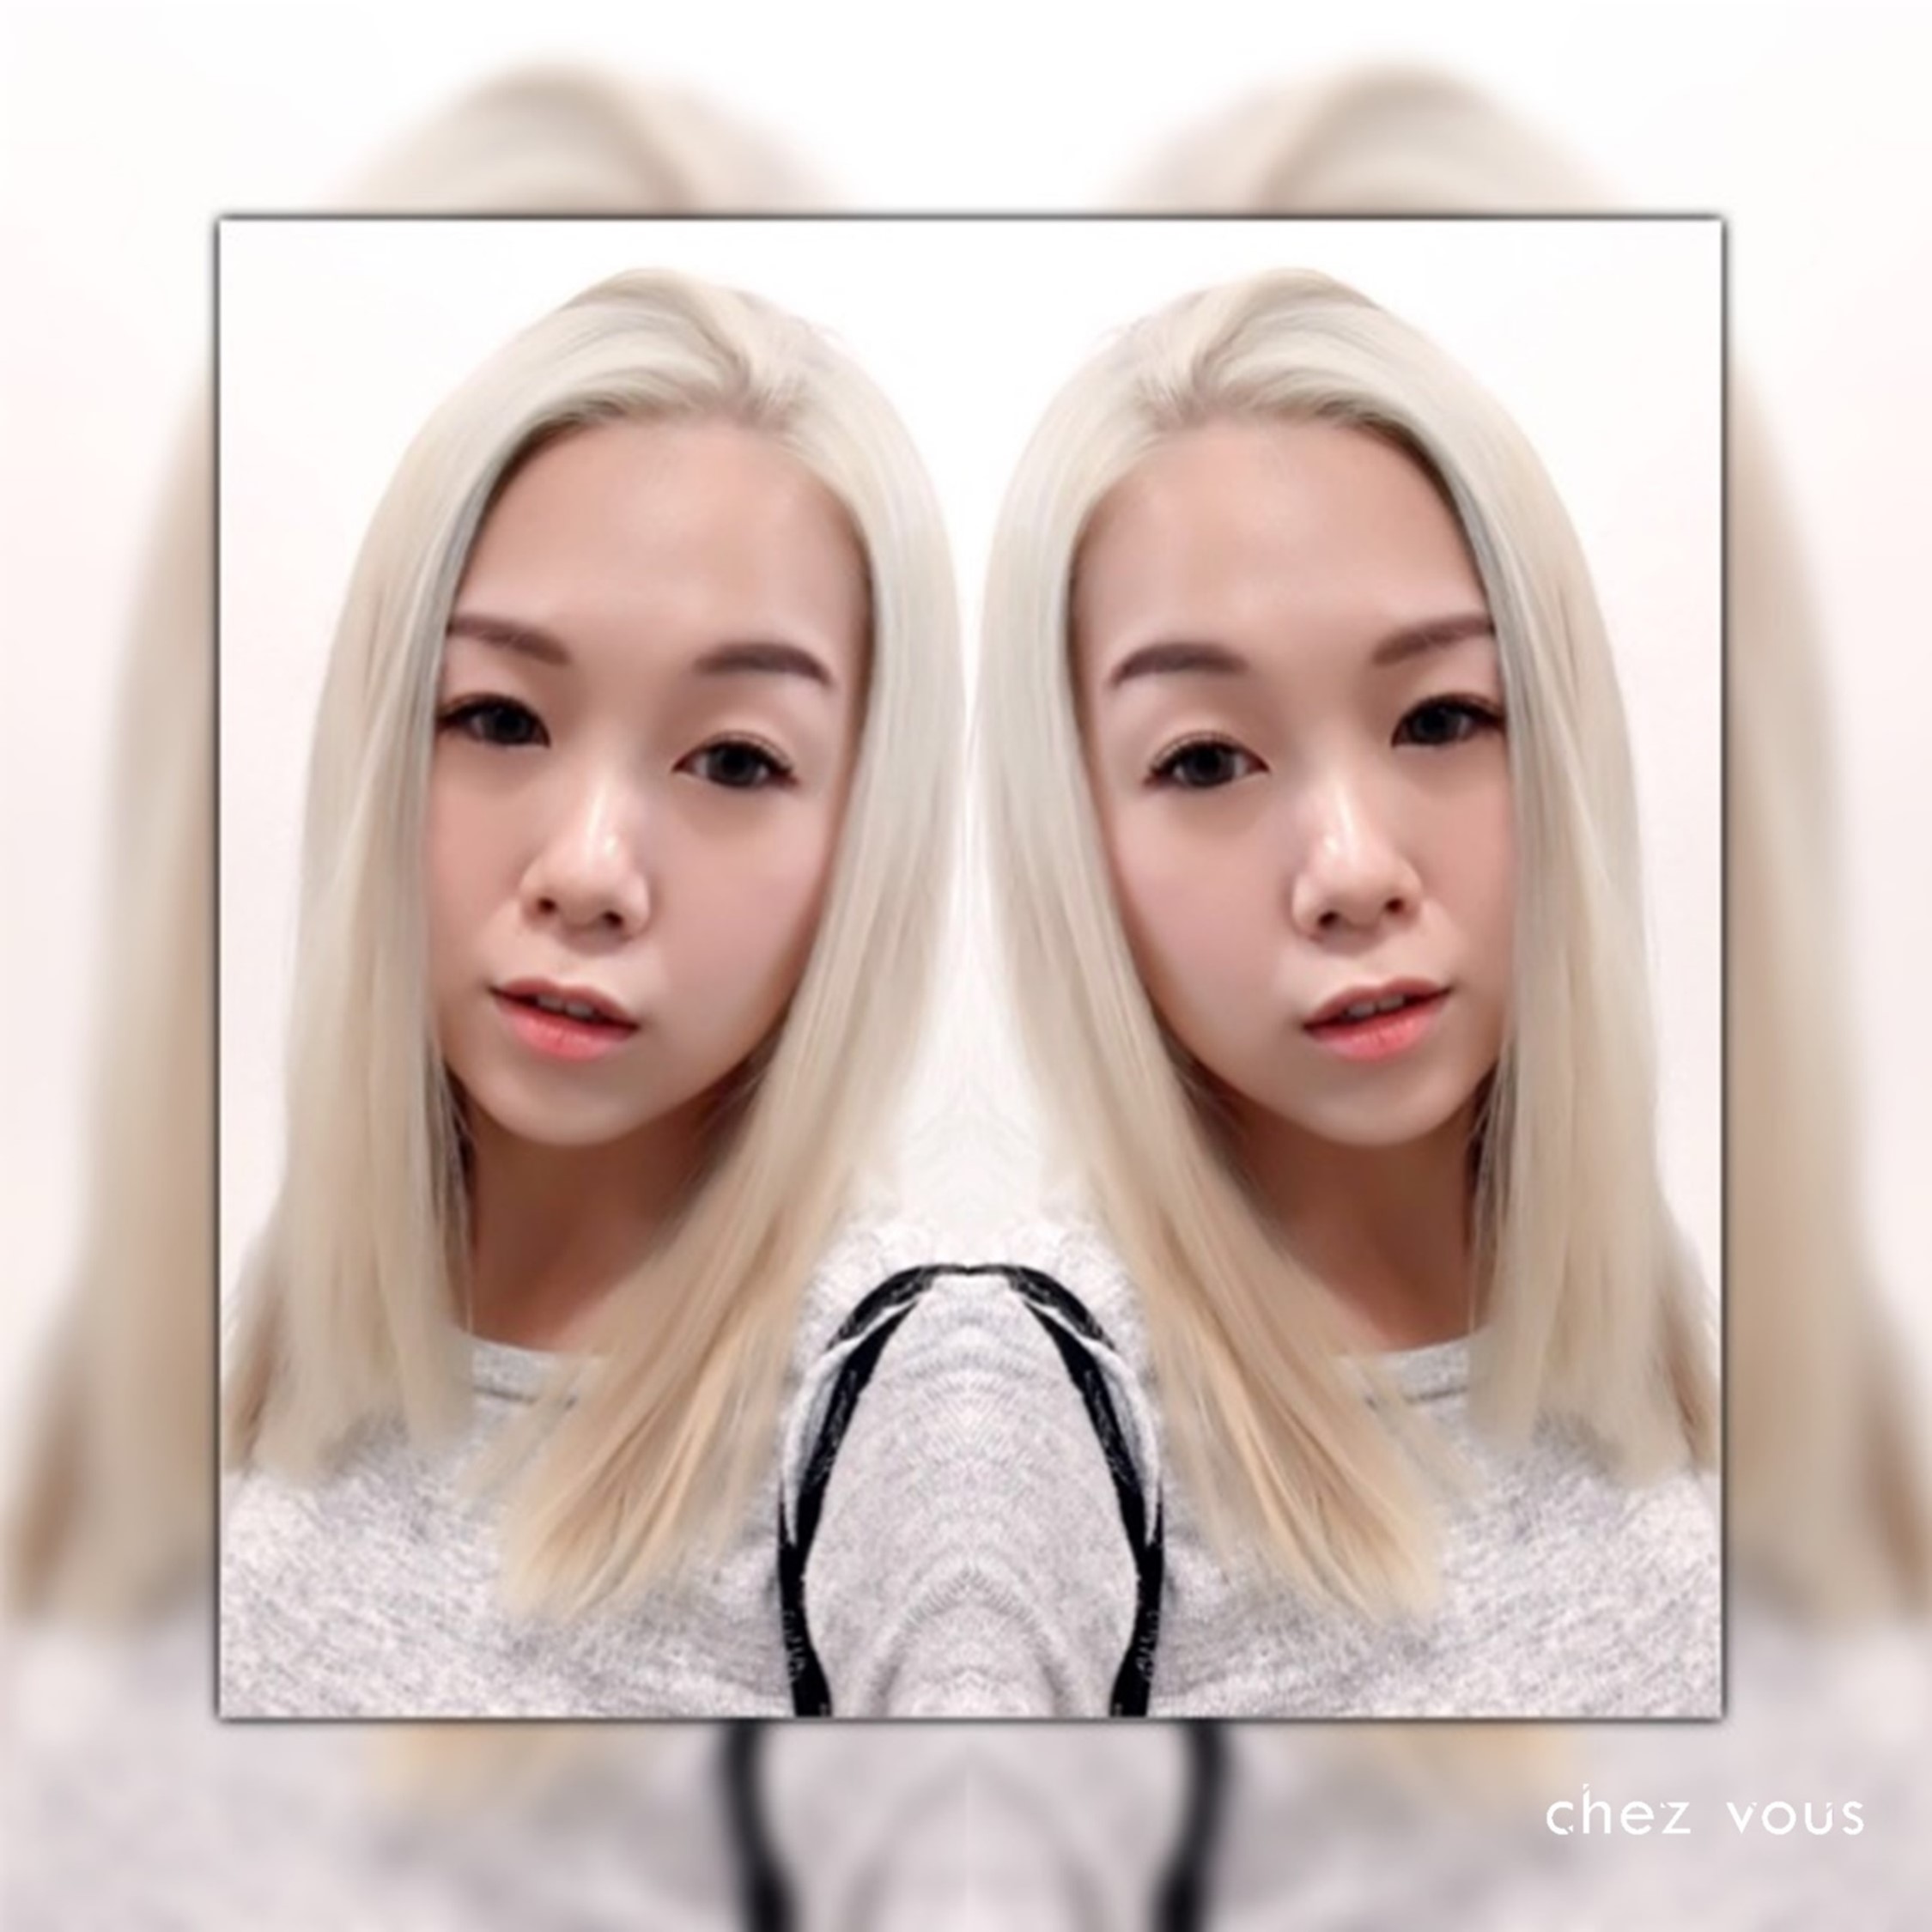 Platinum Blonde Done by Associate Salon Director of Chez Vous, Shawn Chia